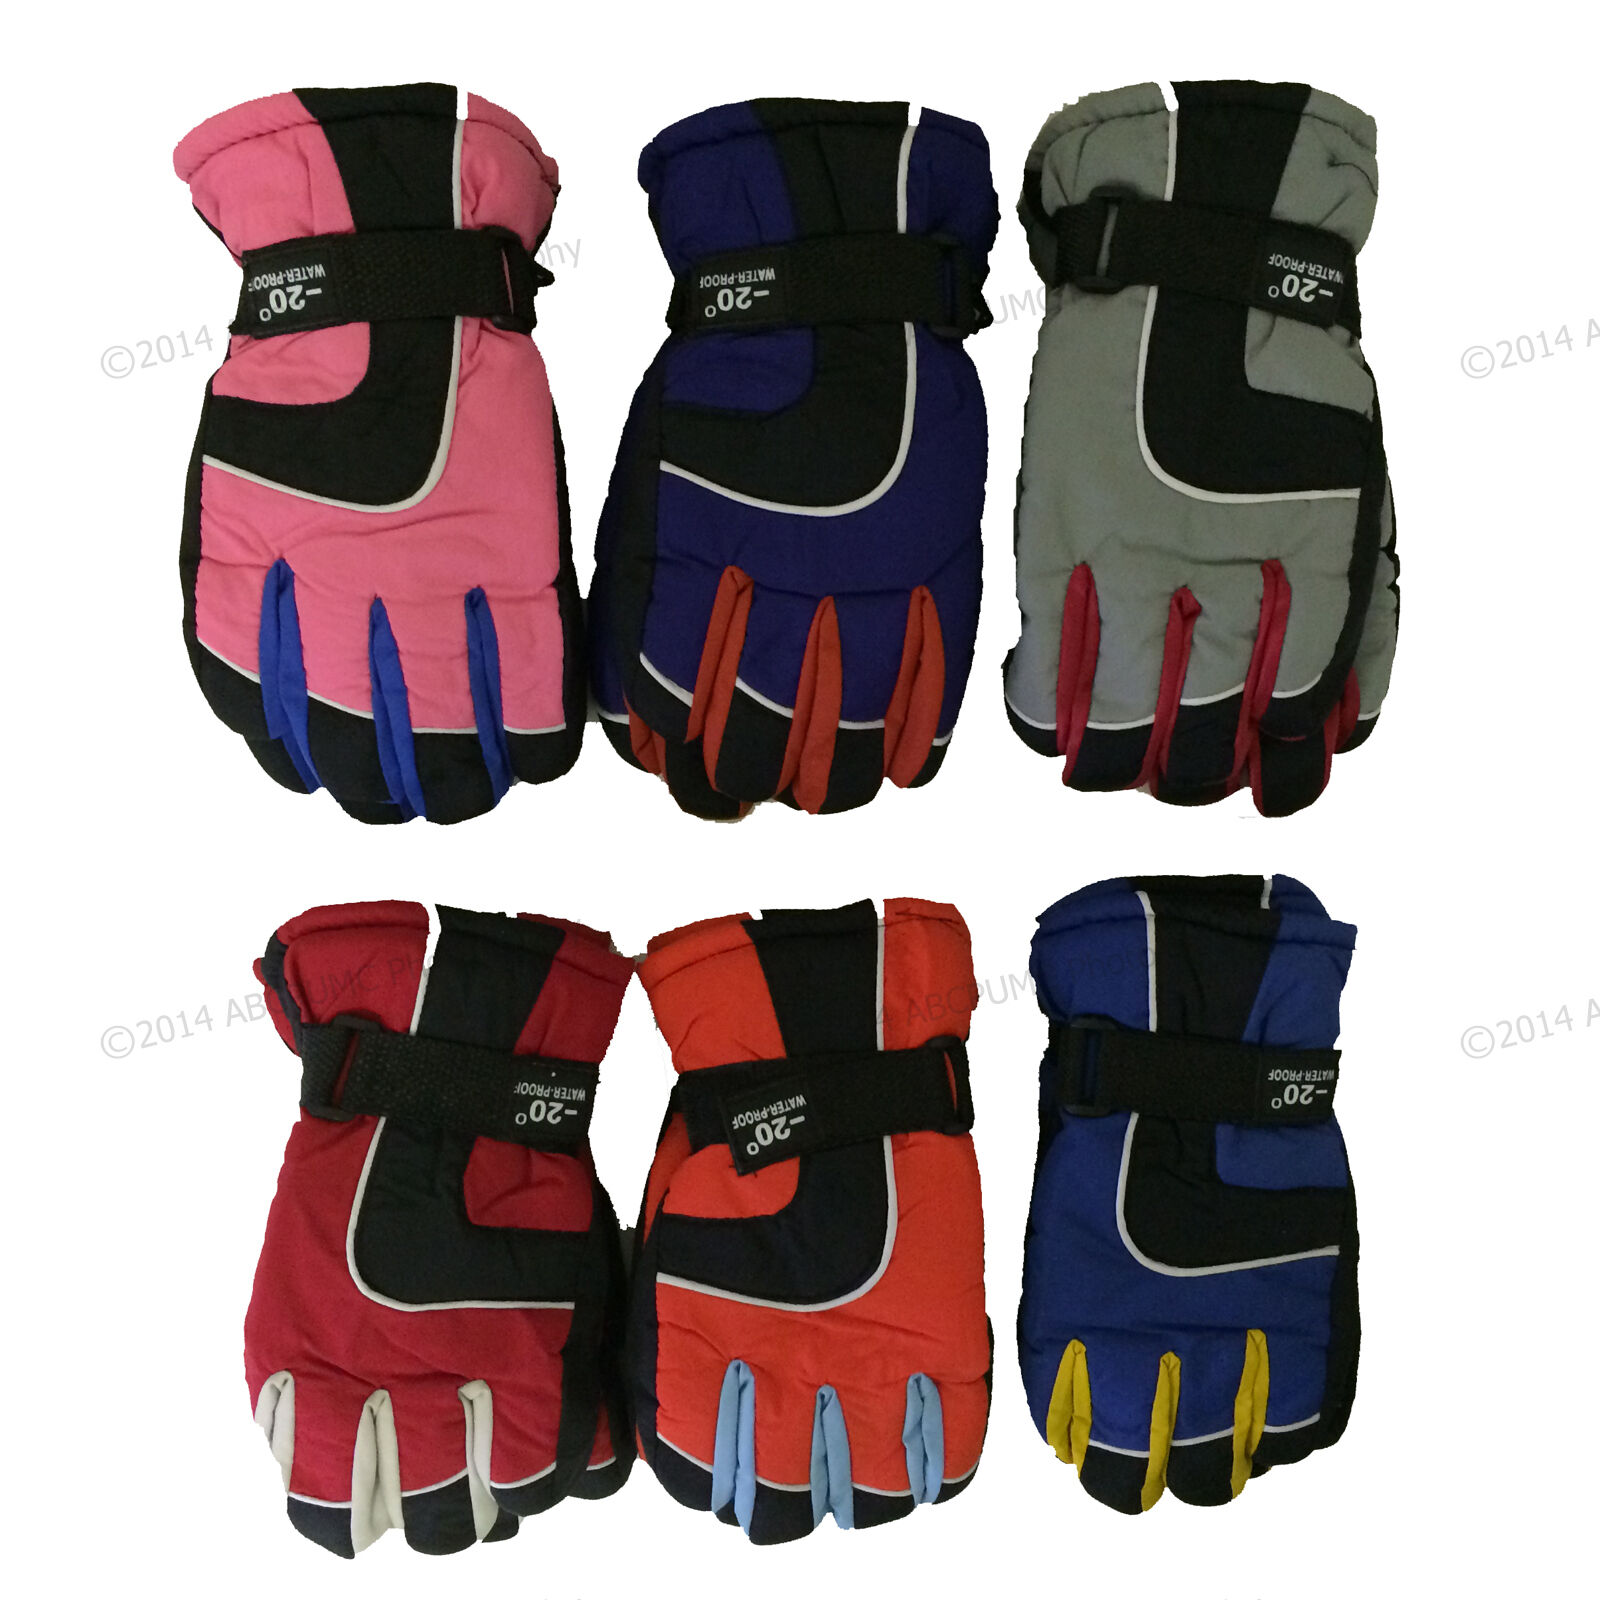 Boy's Girl's Juniors Youth Ski Gloves Winter Snow Insulated Waterproof One Size